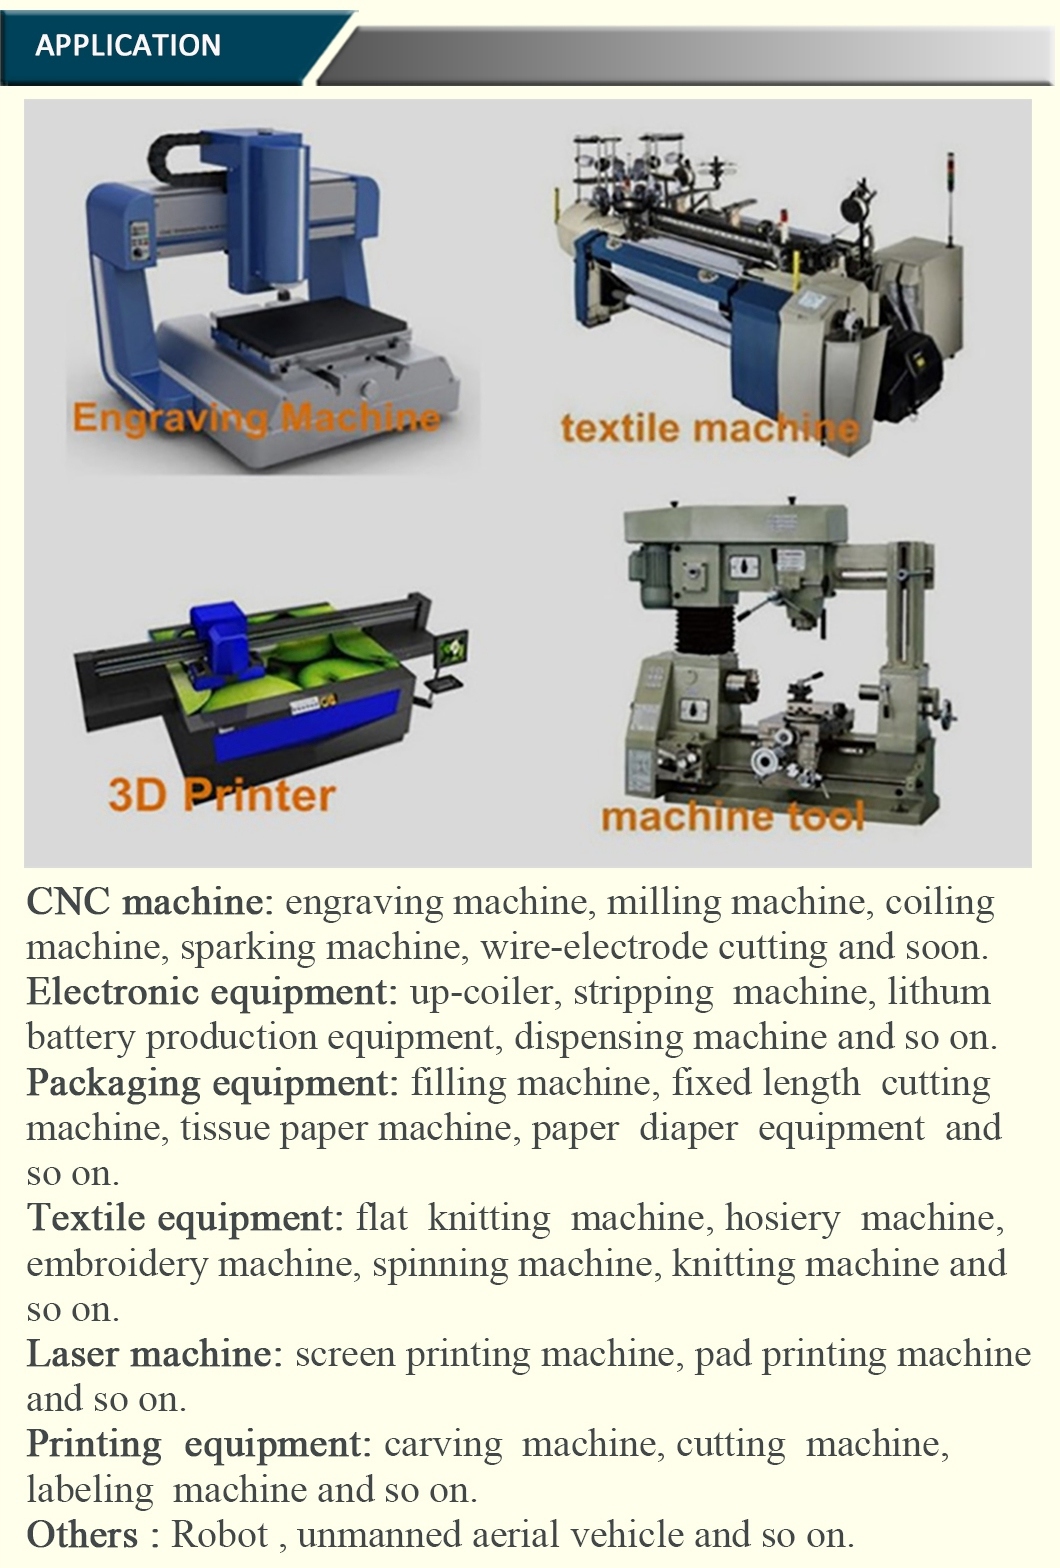 Stepper /Stepping/Step Motor for Industrial CNC Engraving Machines